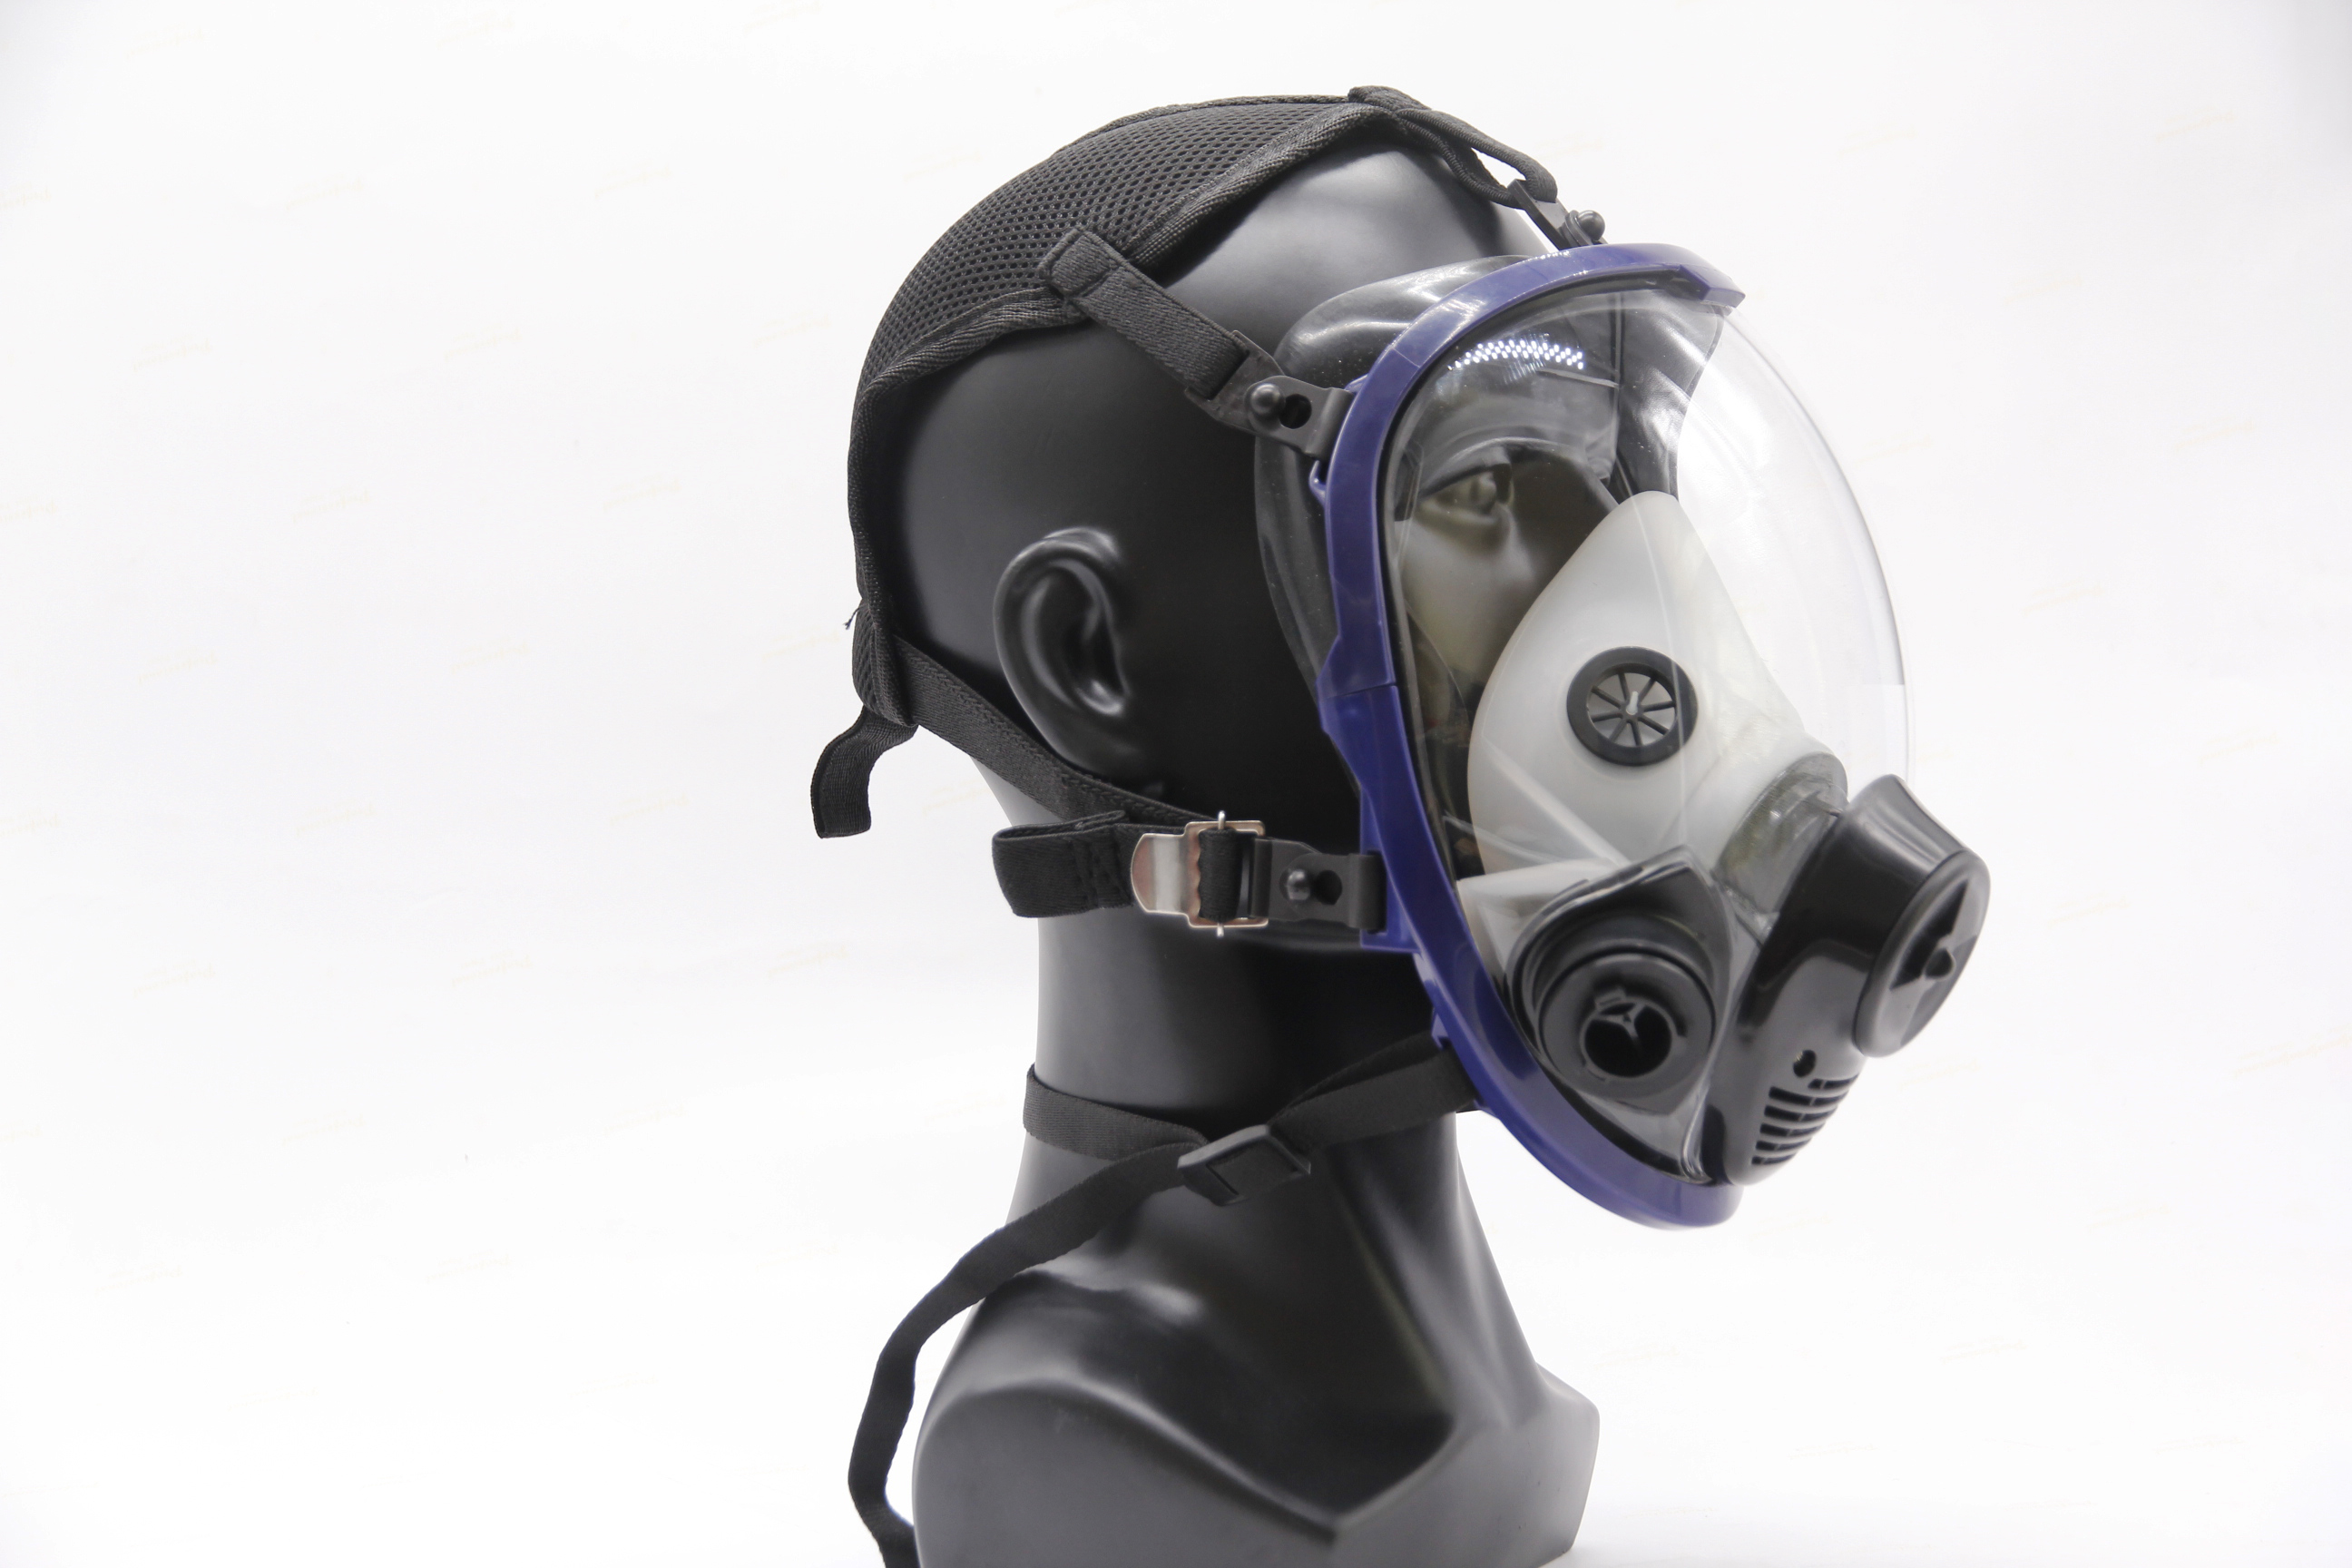 Full Mask Non-powered Air-purifying Respirator PPE-MA